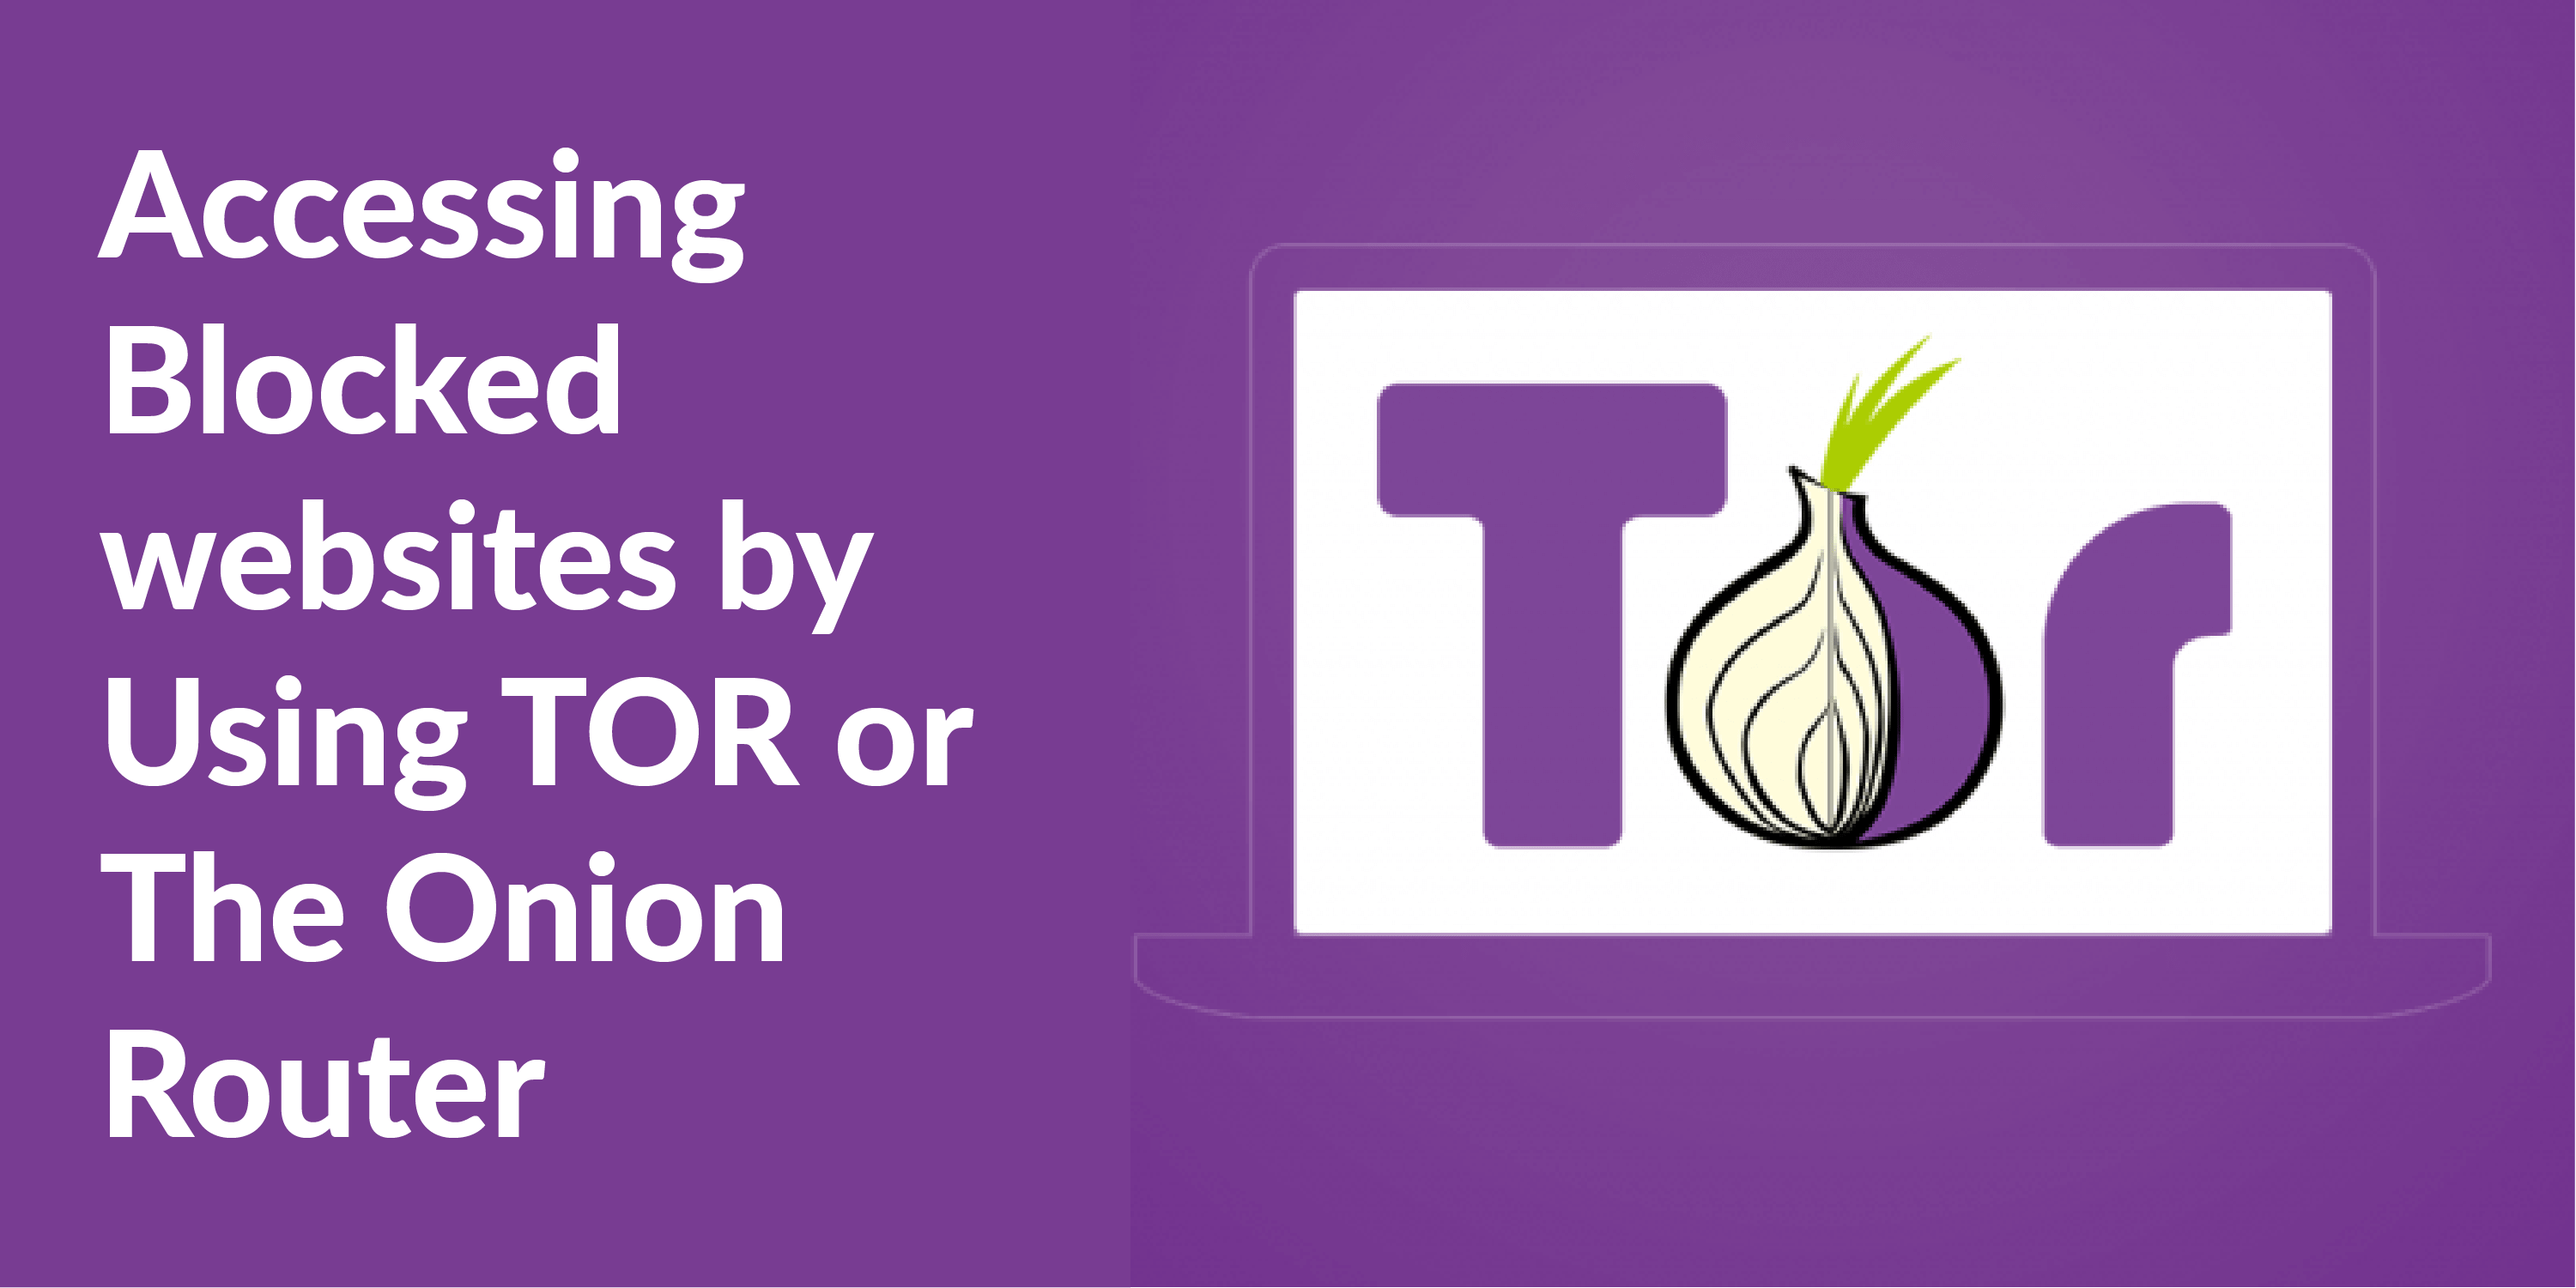 Access the Blocked Websites Using TOR